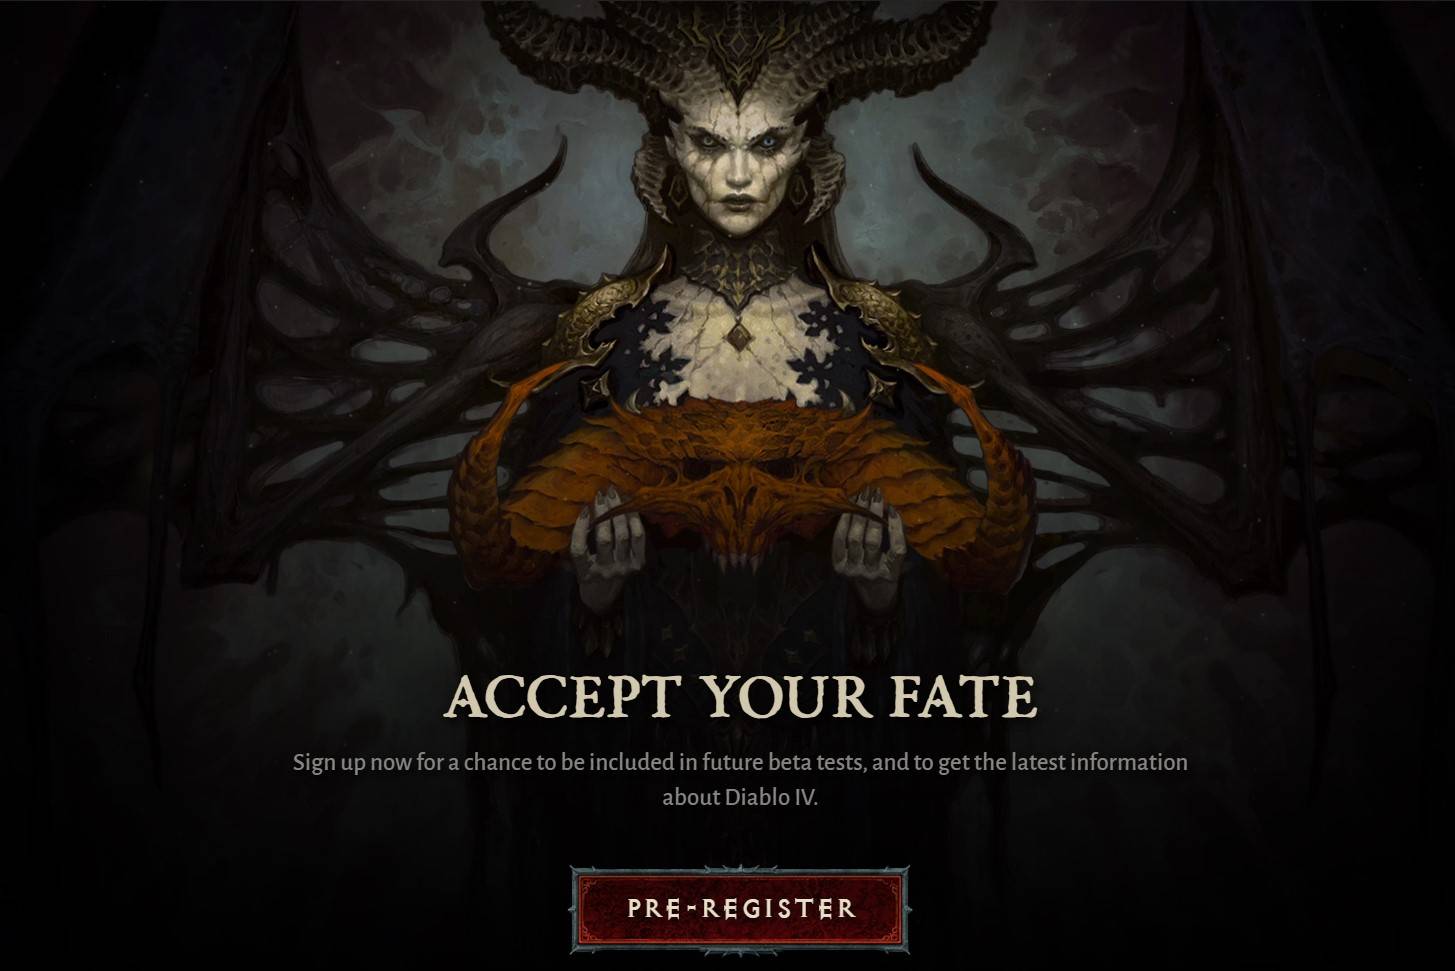 Here’s your chance to play Diablo IV early